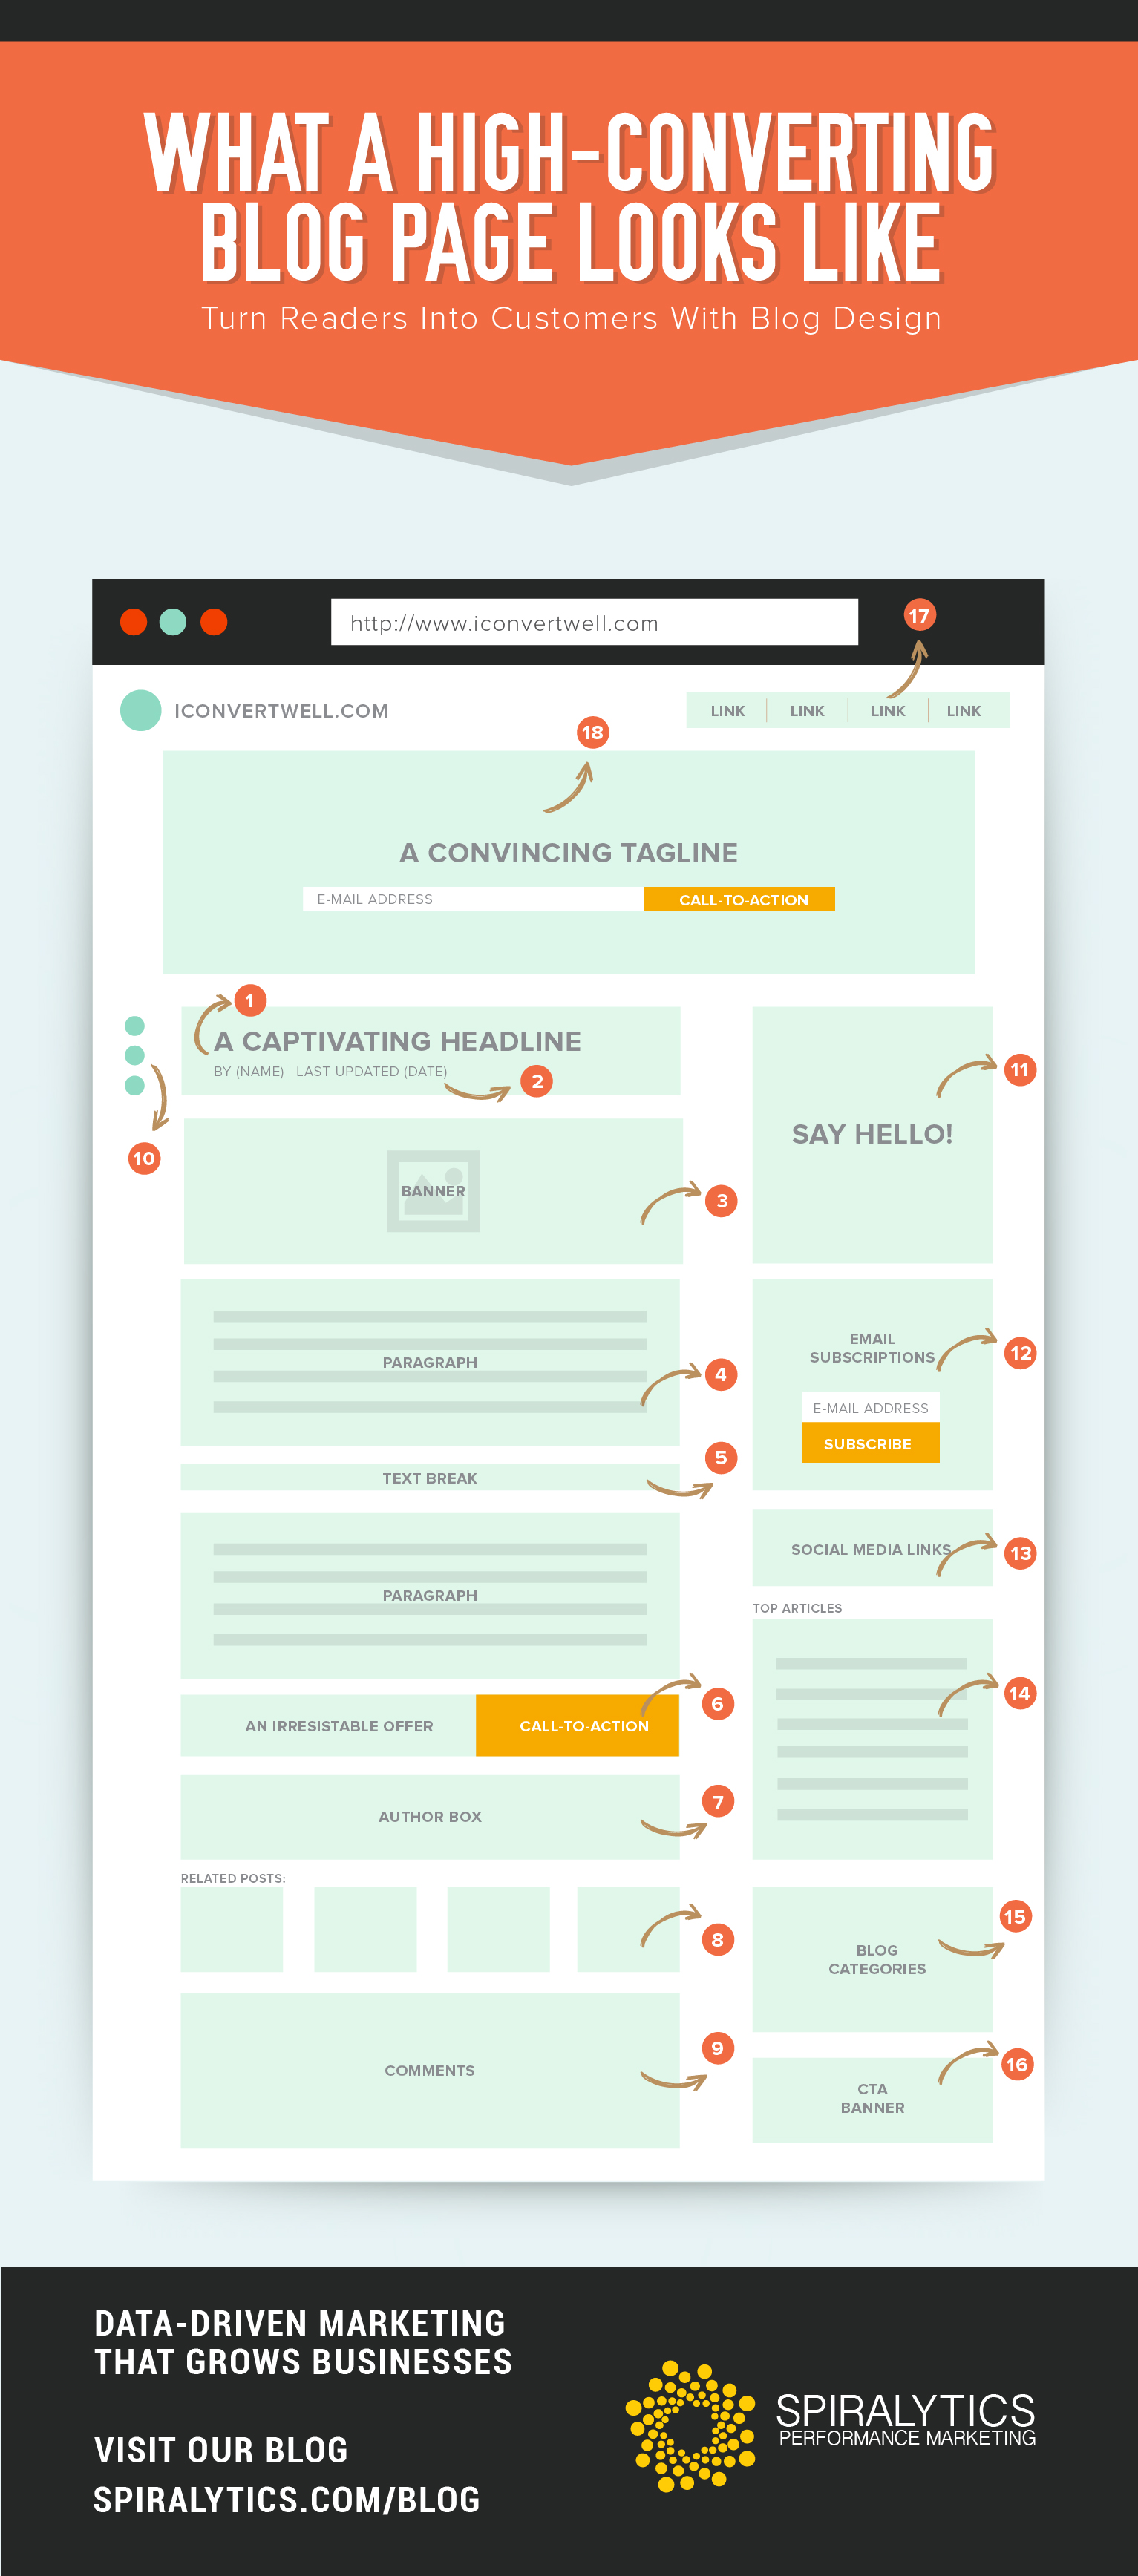 How To Create A Well-Converting Blog Page - Infographic